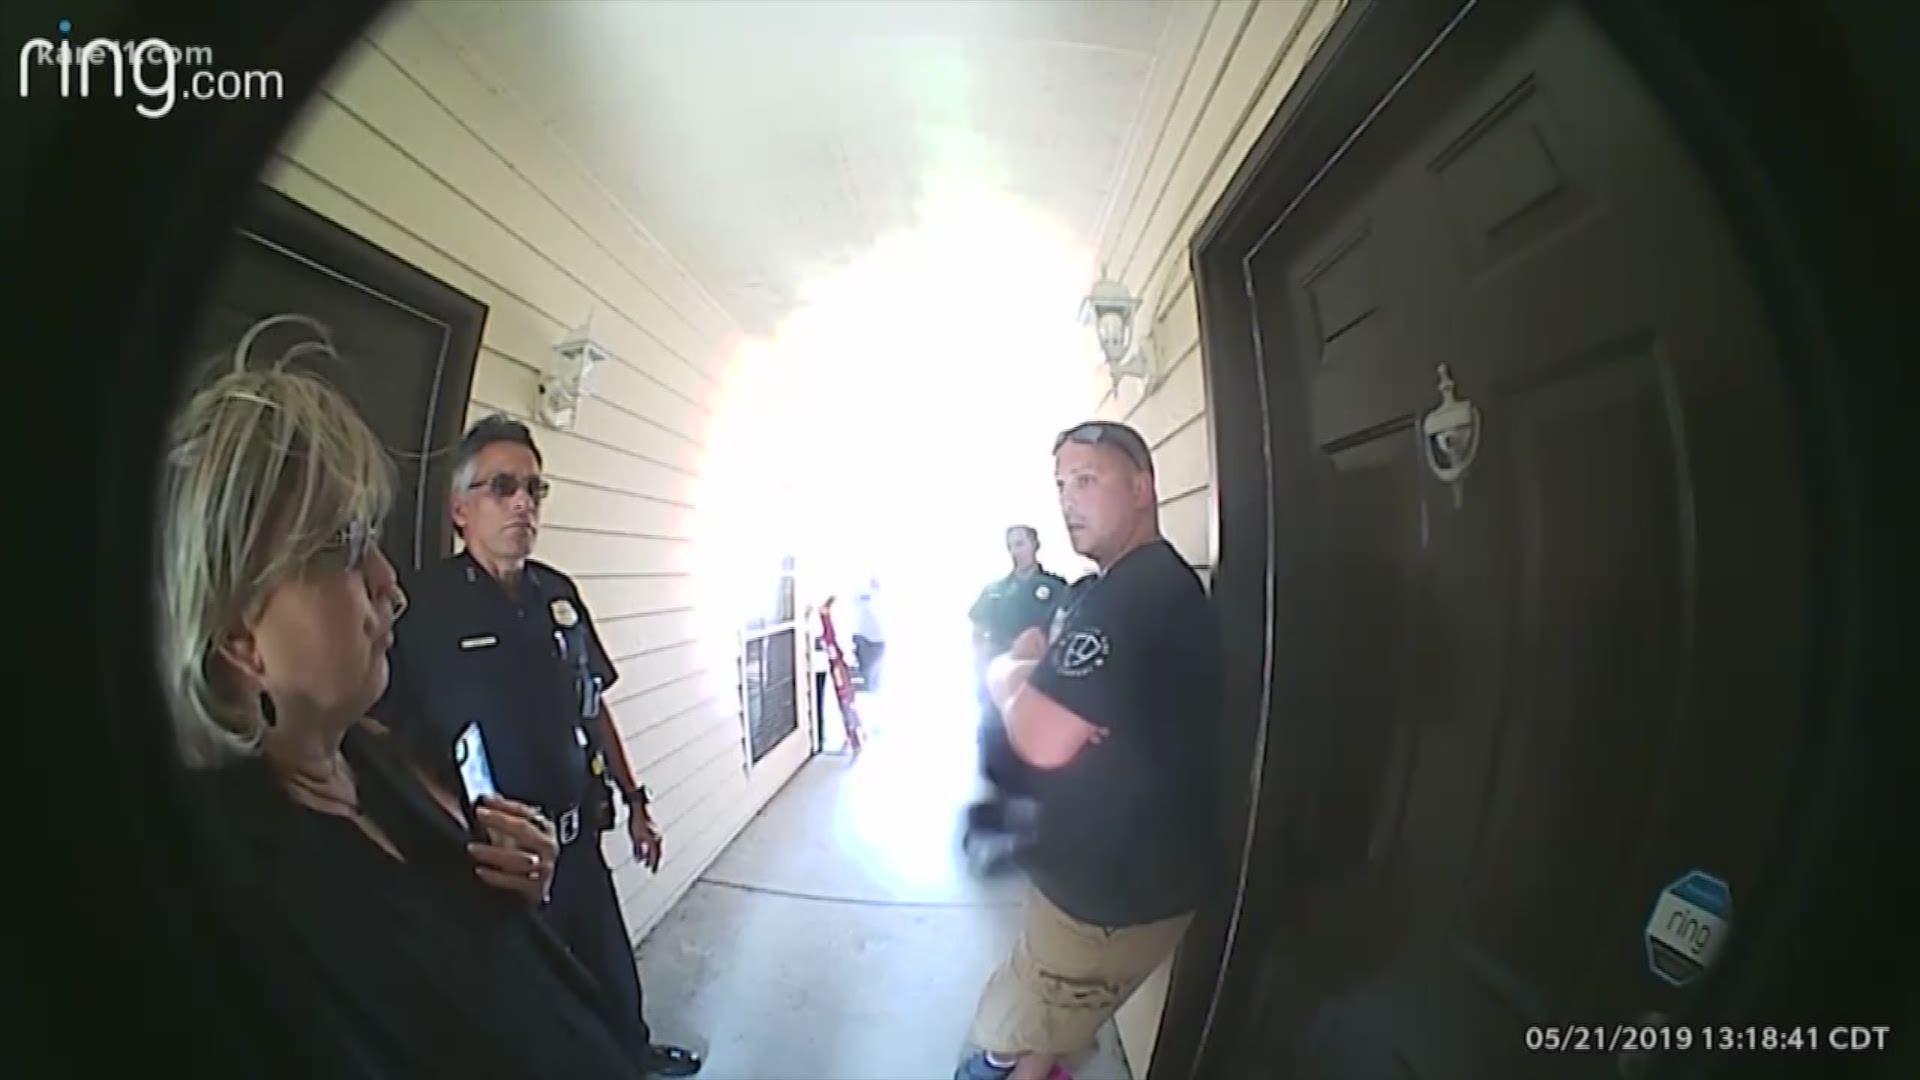 A Houston veteran set up a Ring doorbell outside his apartment to help ease anxiety related to PTSD, but his apartment complex says he can't keep the video device up. https://kare11.tv/2wfMSgN